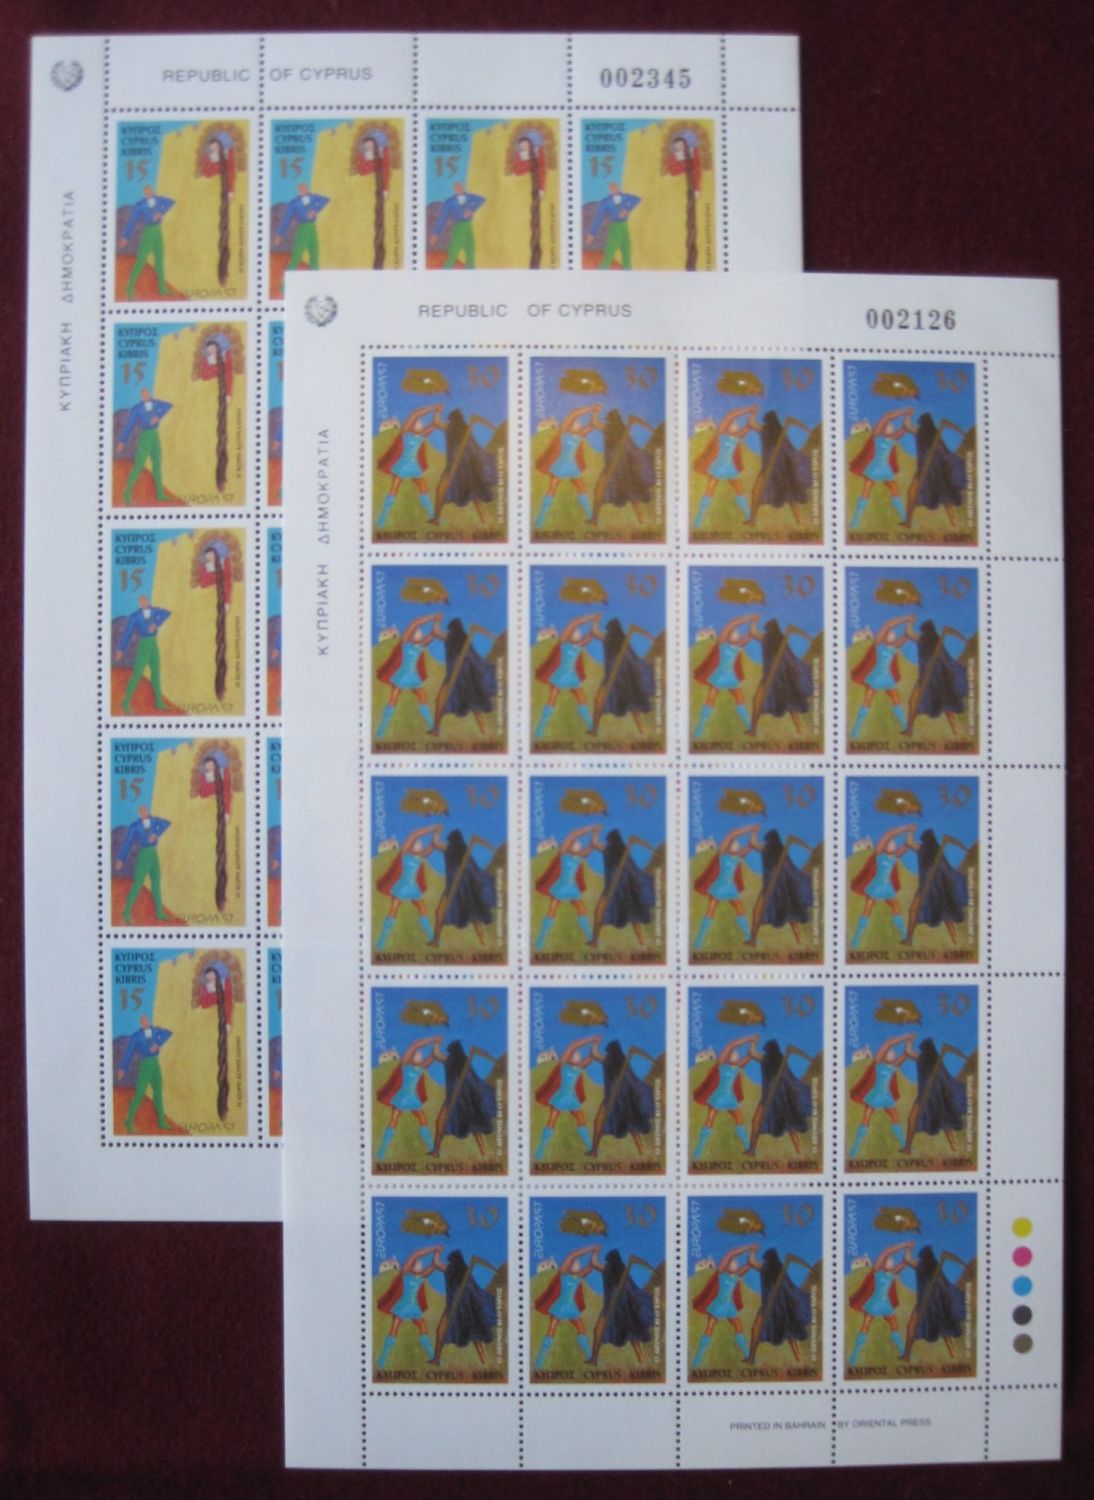 Cyprus Stamps SG 924-25 1997 Europa Tales and Legends - Full sheet MINT (k6